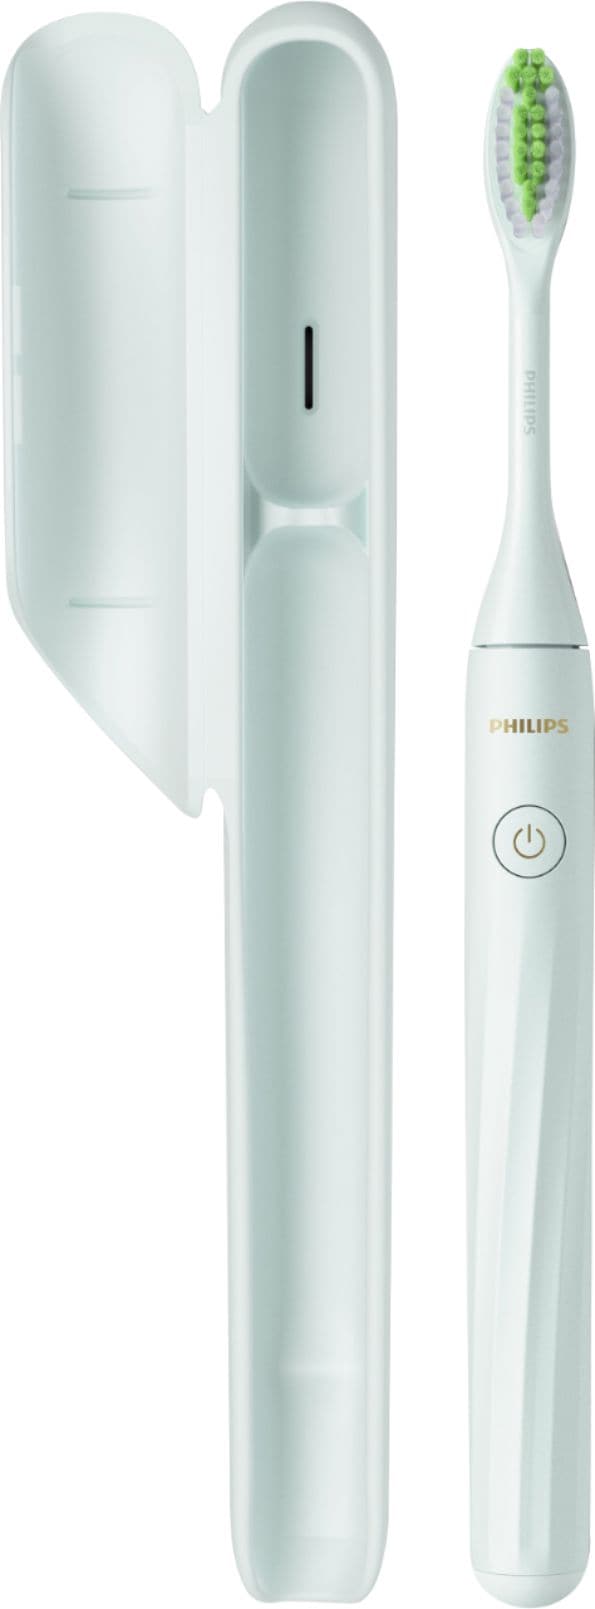 Philips Sonicare - Philips One by Sonicare Battery Toothbrush - Mint_4